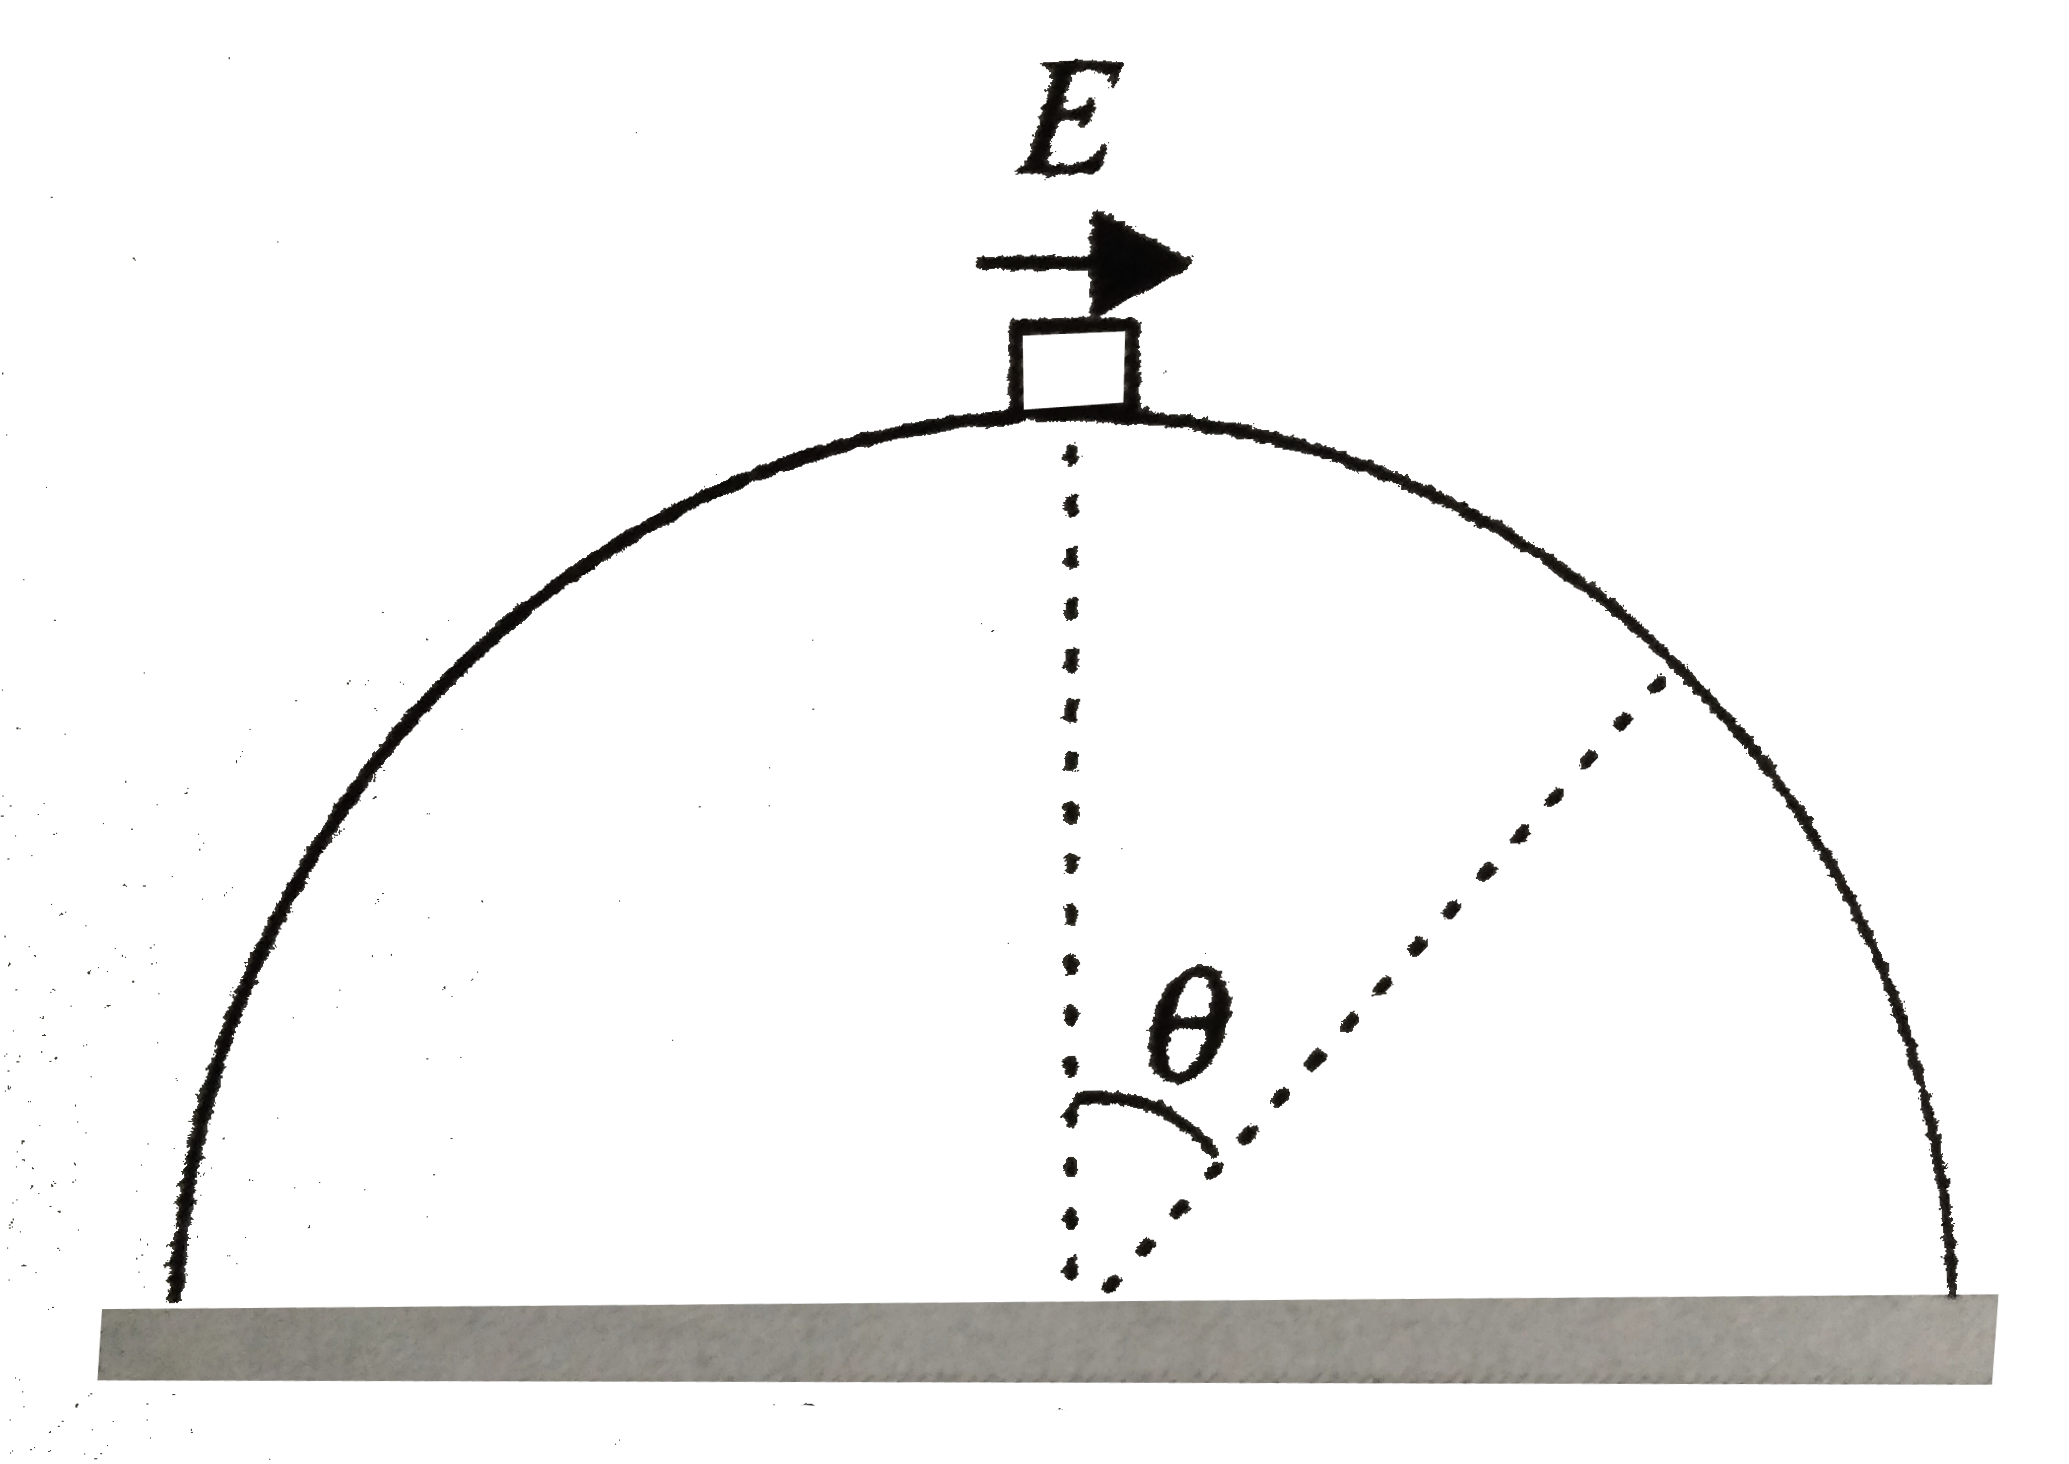 In a horizontal unifrom electirc field, a small charged disk is gently released on the top of a fixed sperical dome. The disk slides down the some without friction and breaks away from the surface of the dome at the angular position theta = sin^(-1)(3//5) from vertical. Determine the  ratio of the force of gravity acting on the disk to force of its interaction with the field .